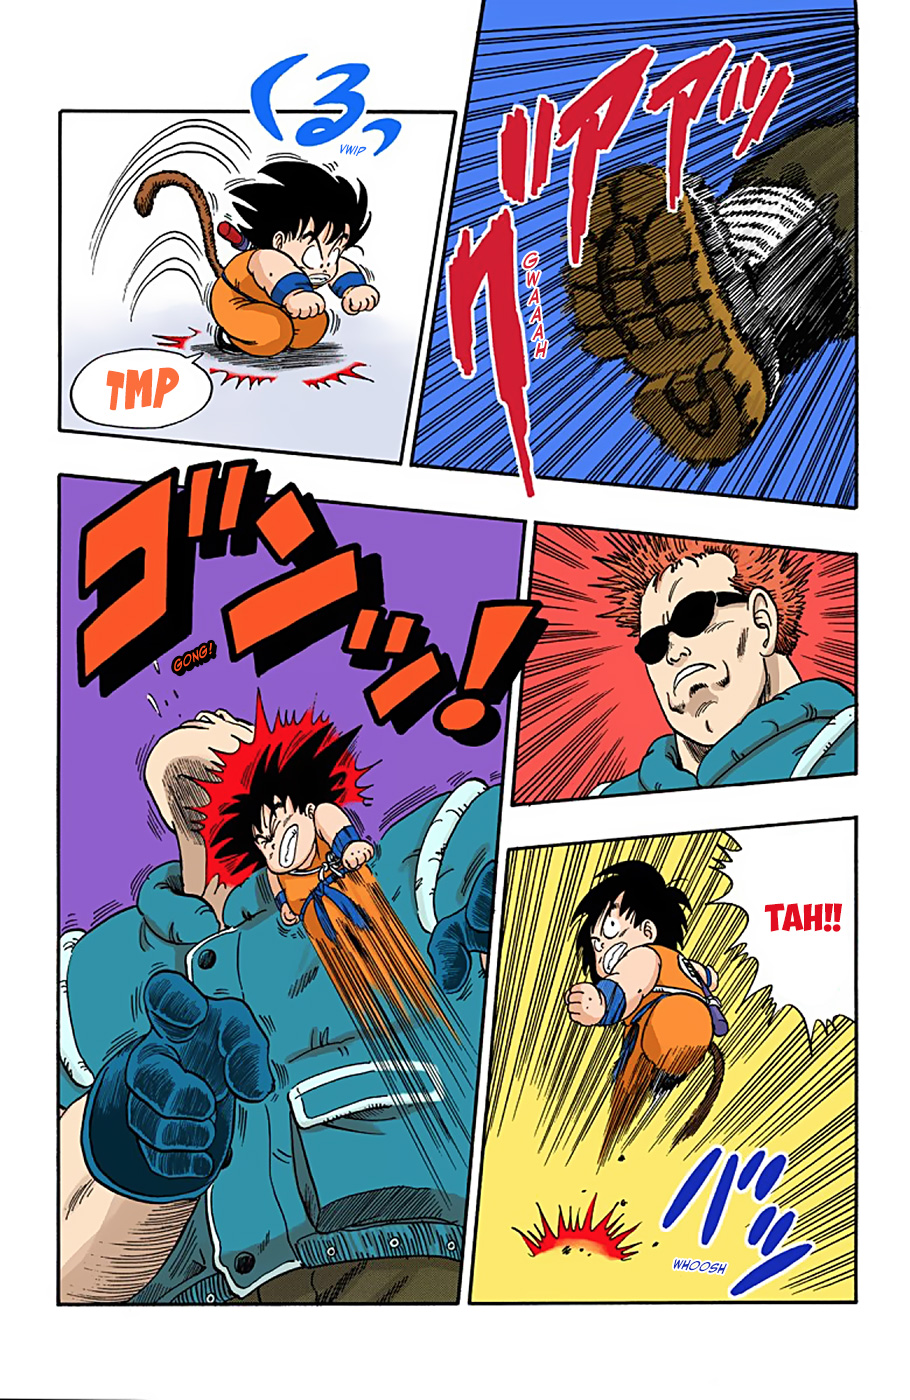 Dragon Ball Full Color Edition Vol. 5 Ch. 59 The Demon on the Third Floor!!